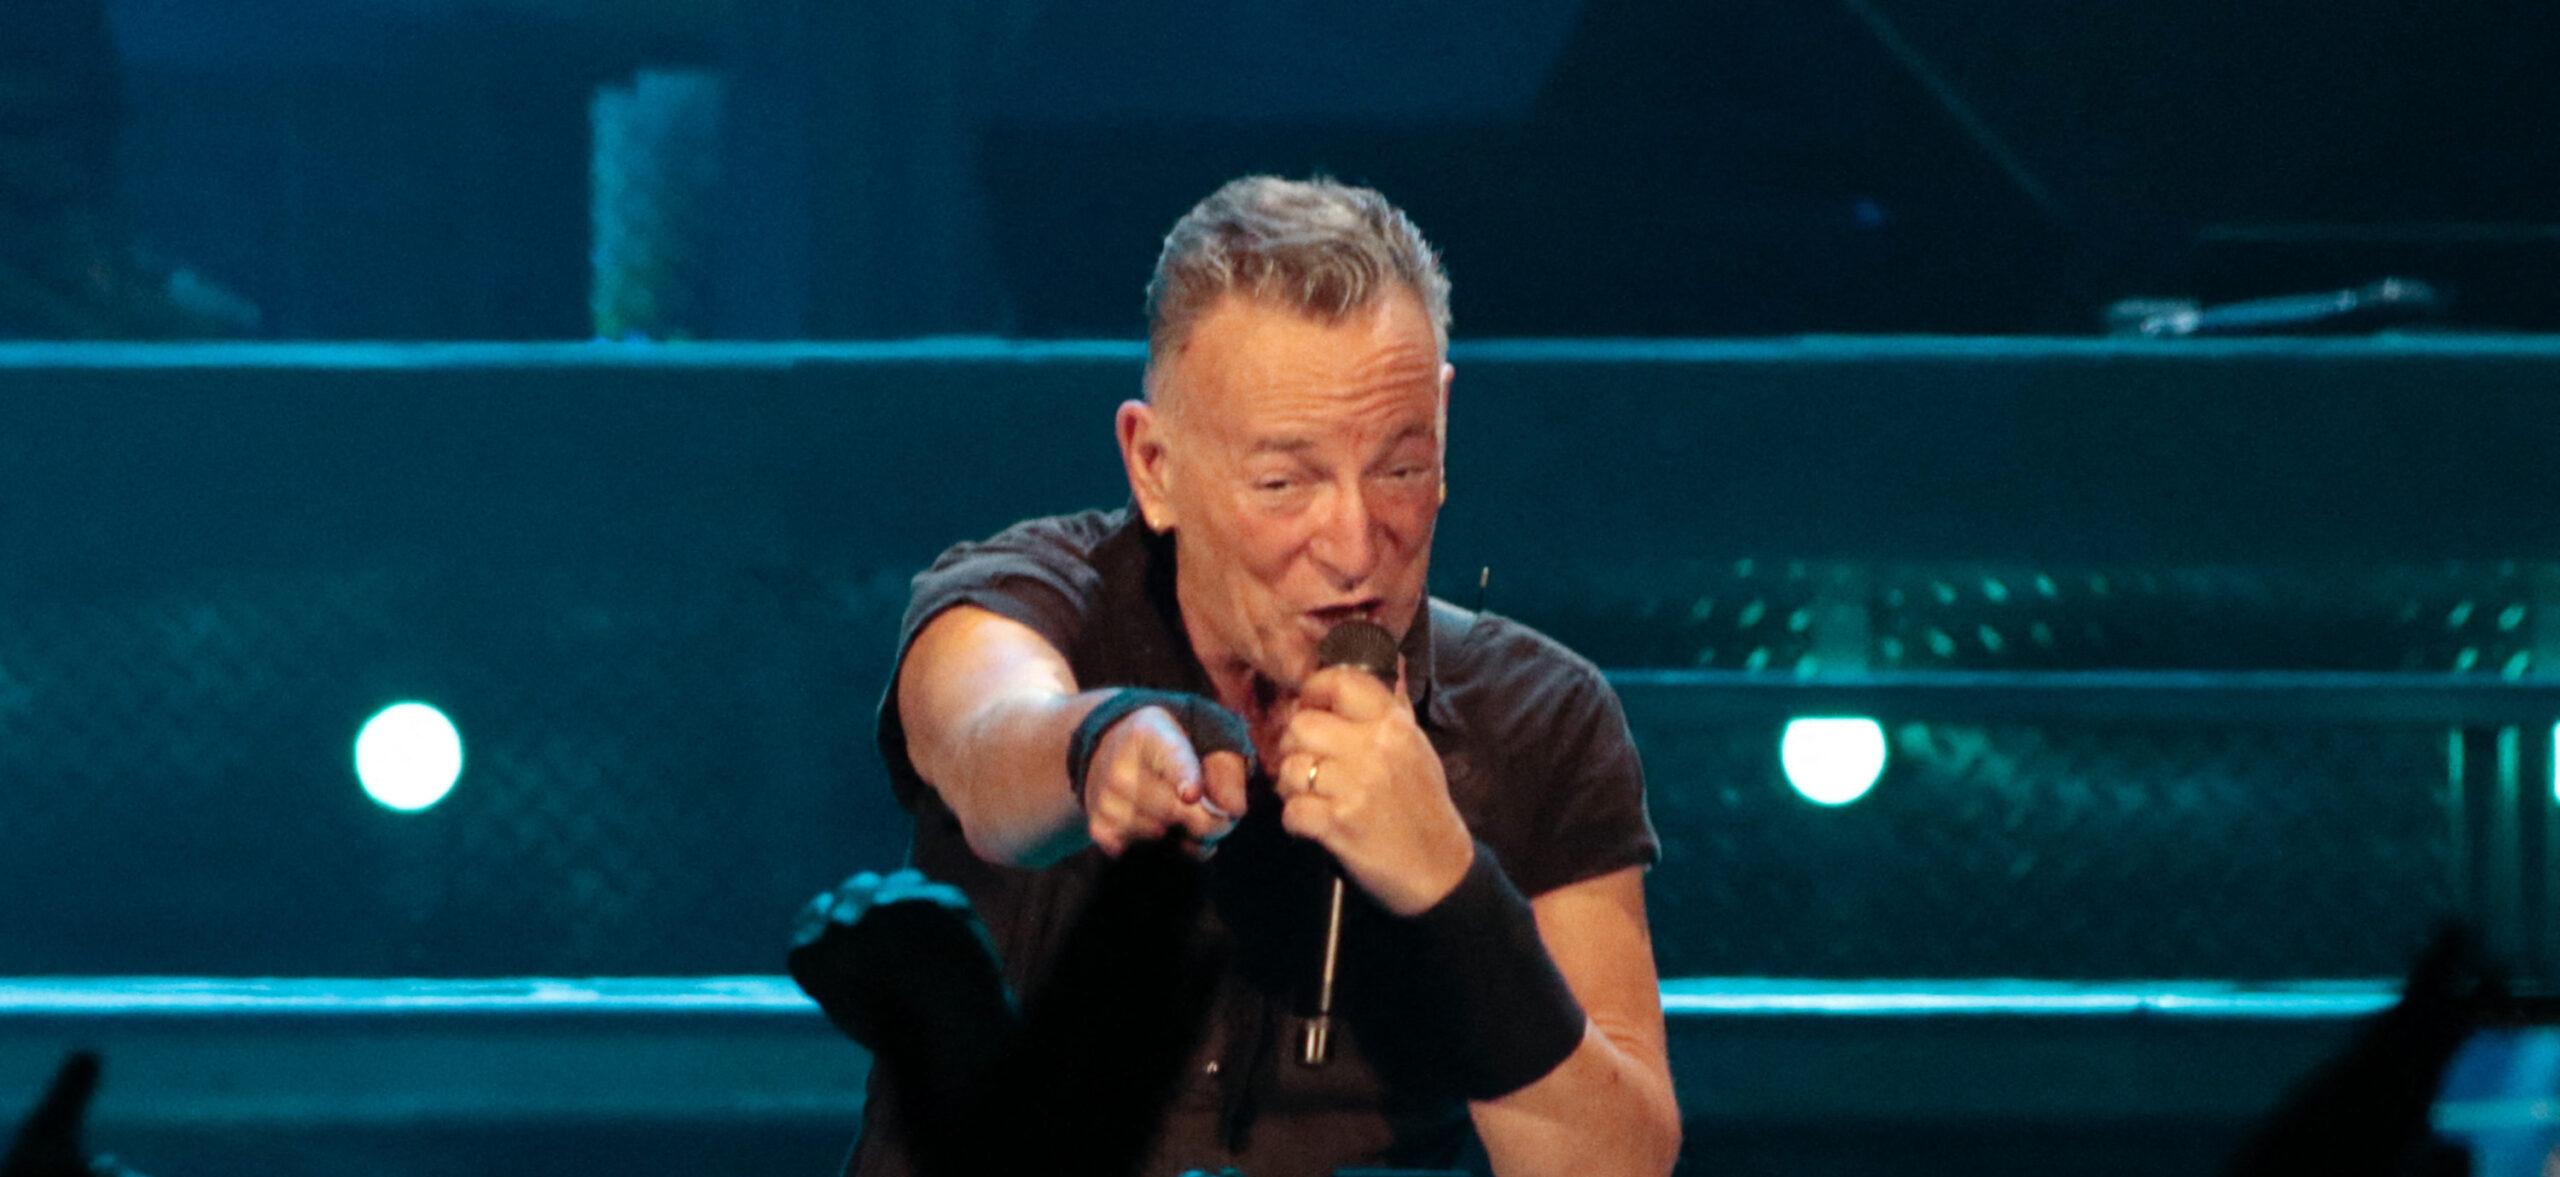 Bruce Springsteen Receives An Interesting Gift While On Stage!